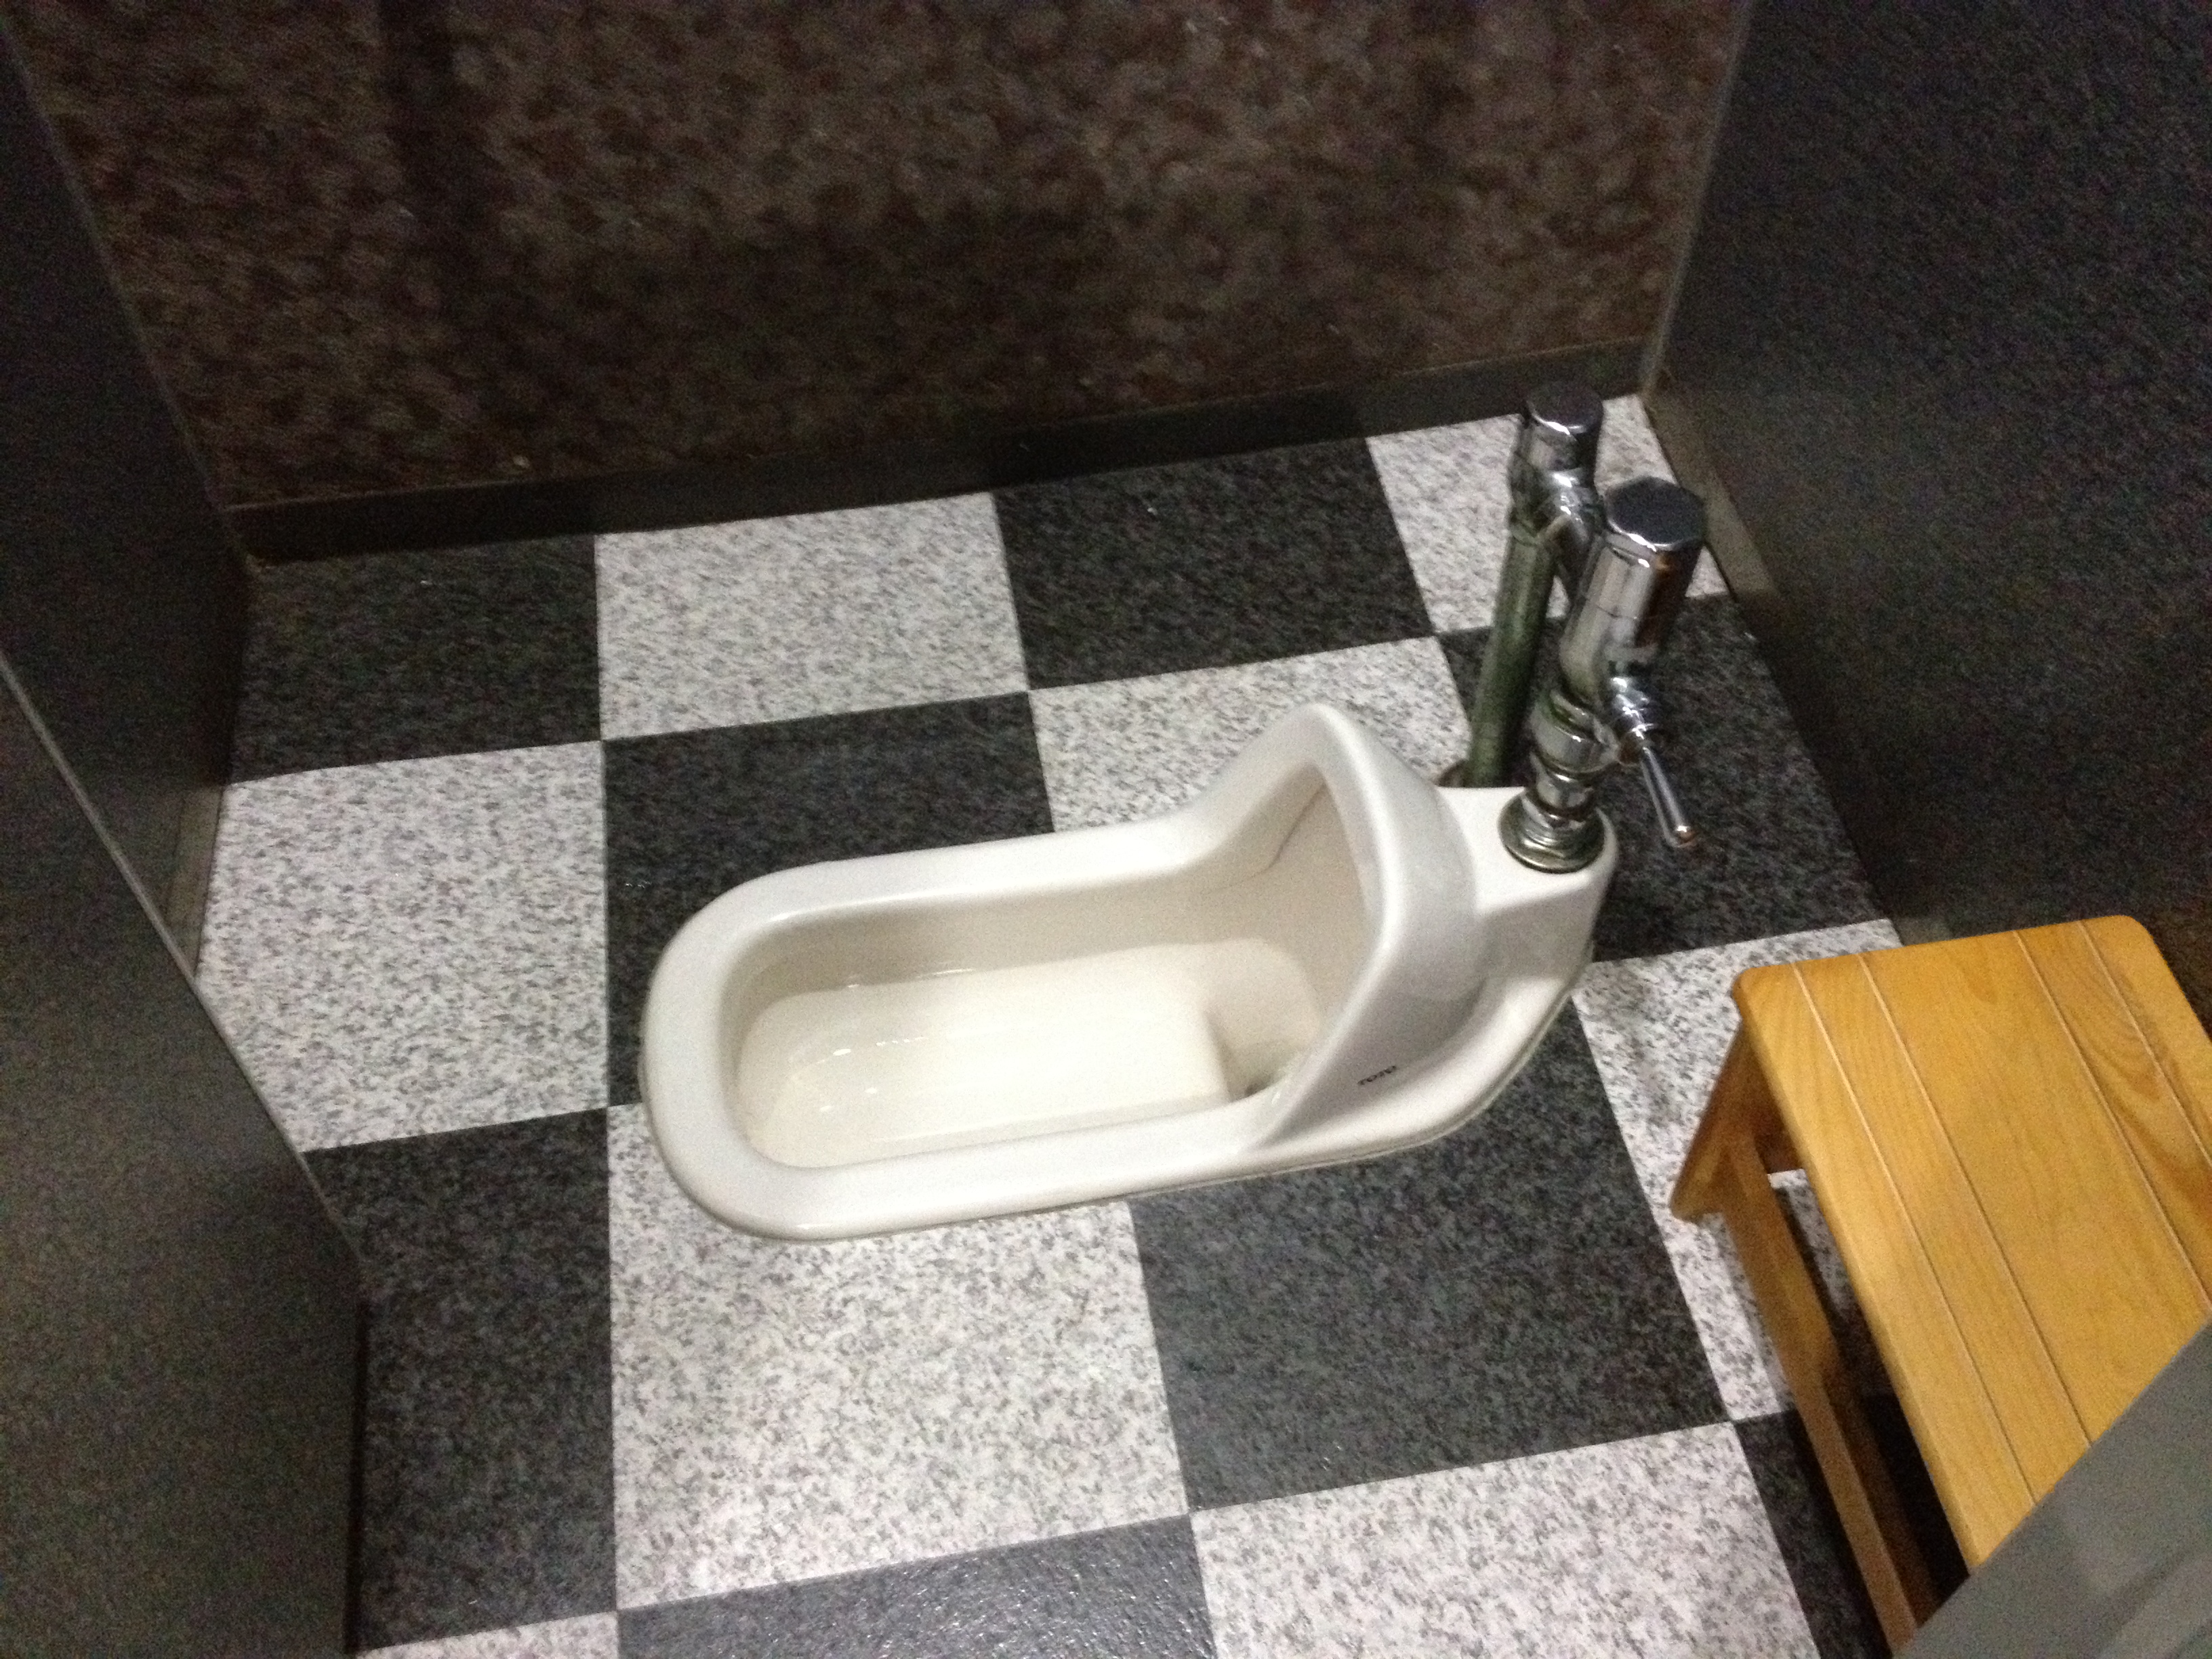 Japanese Toilets From Squatting To Robotic IntrovertJapan